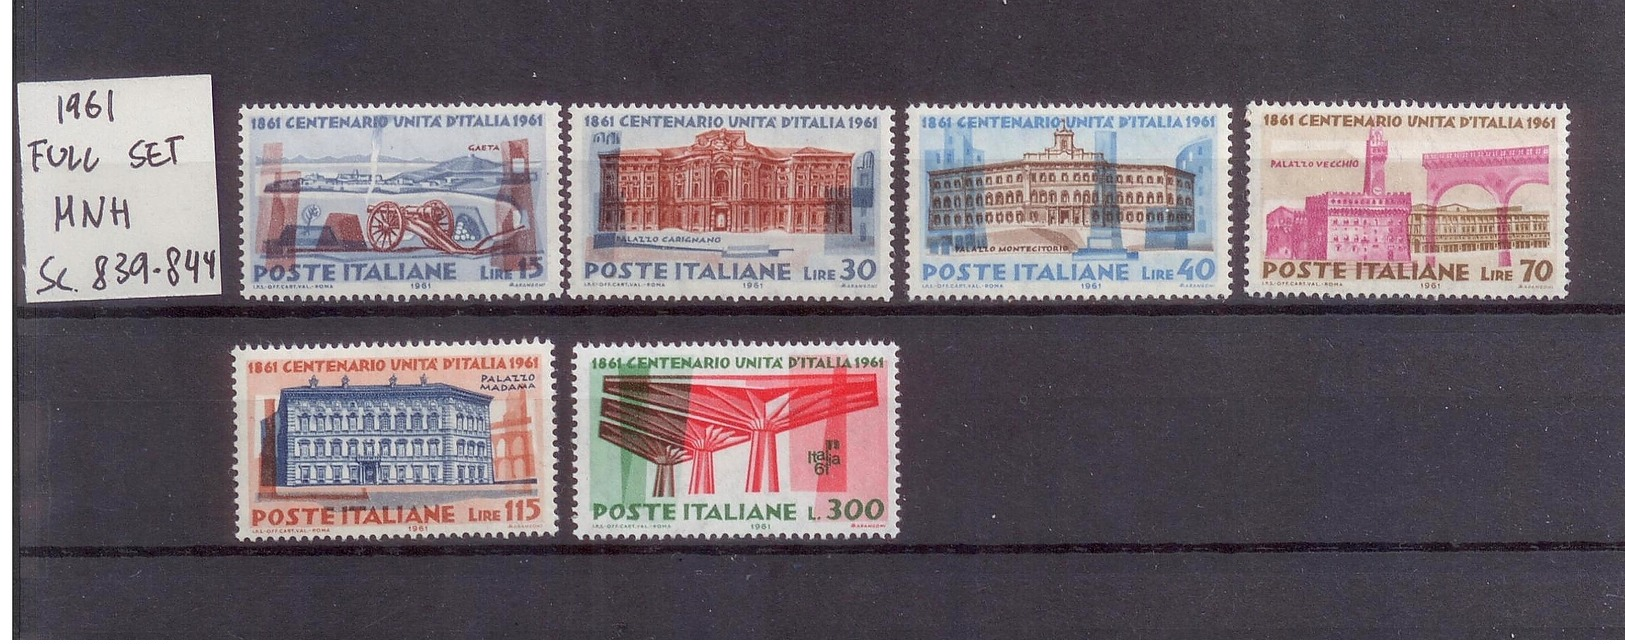 Italy stamp collection, 1862- , high catalogue value, FREE REGISTERED SHIPPING!